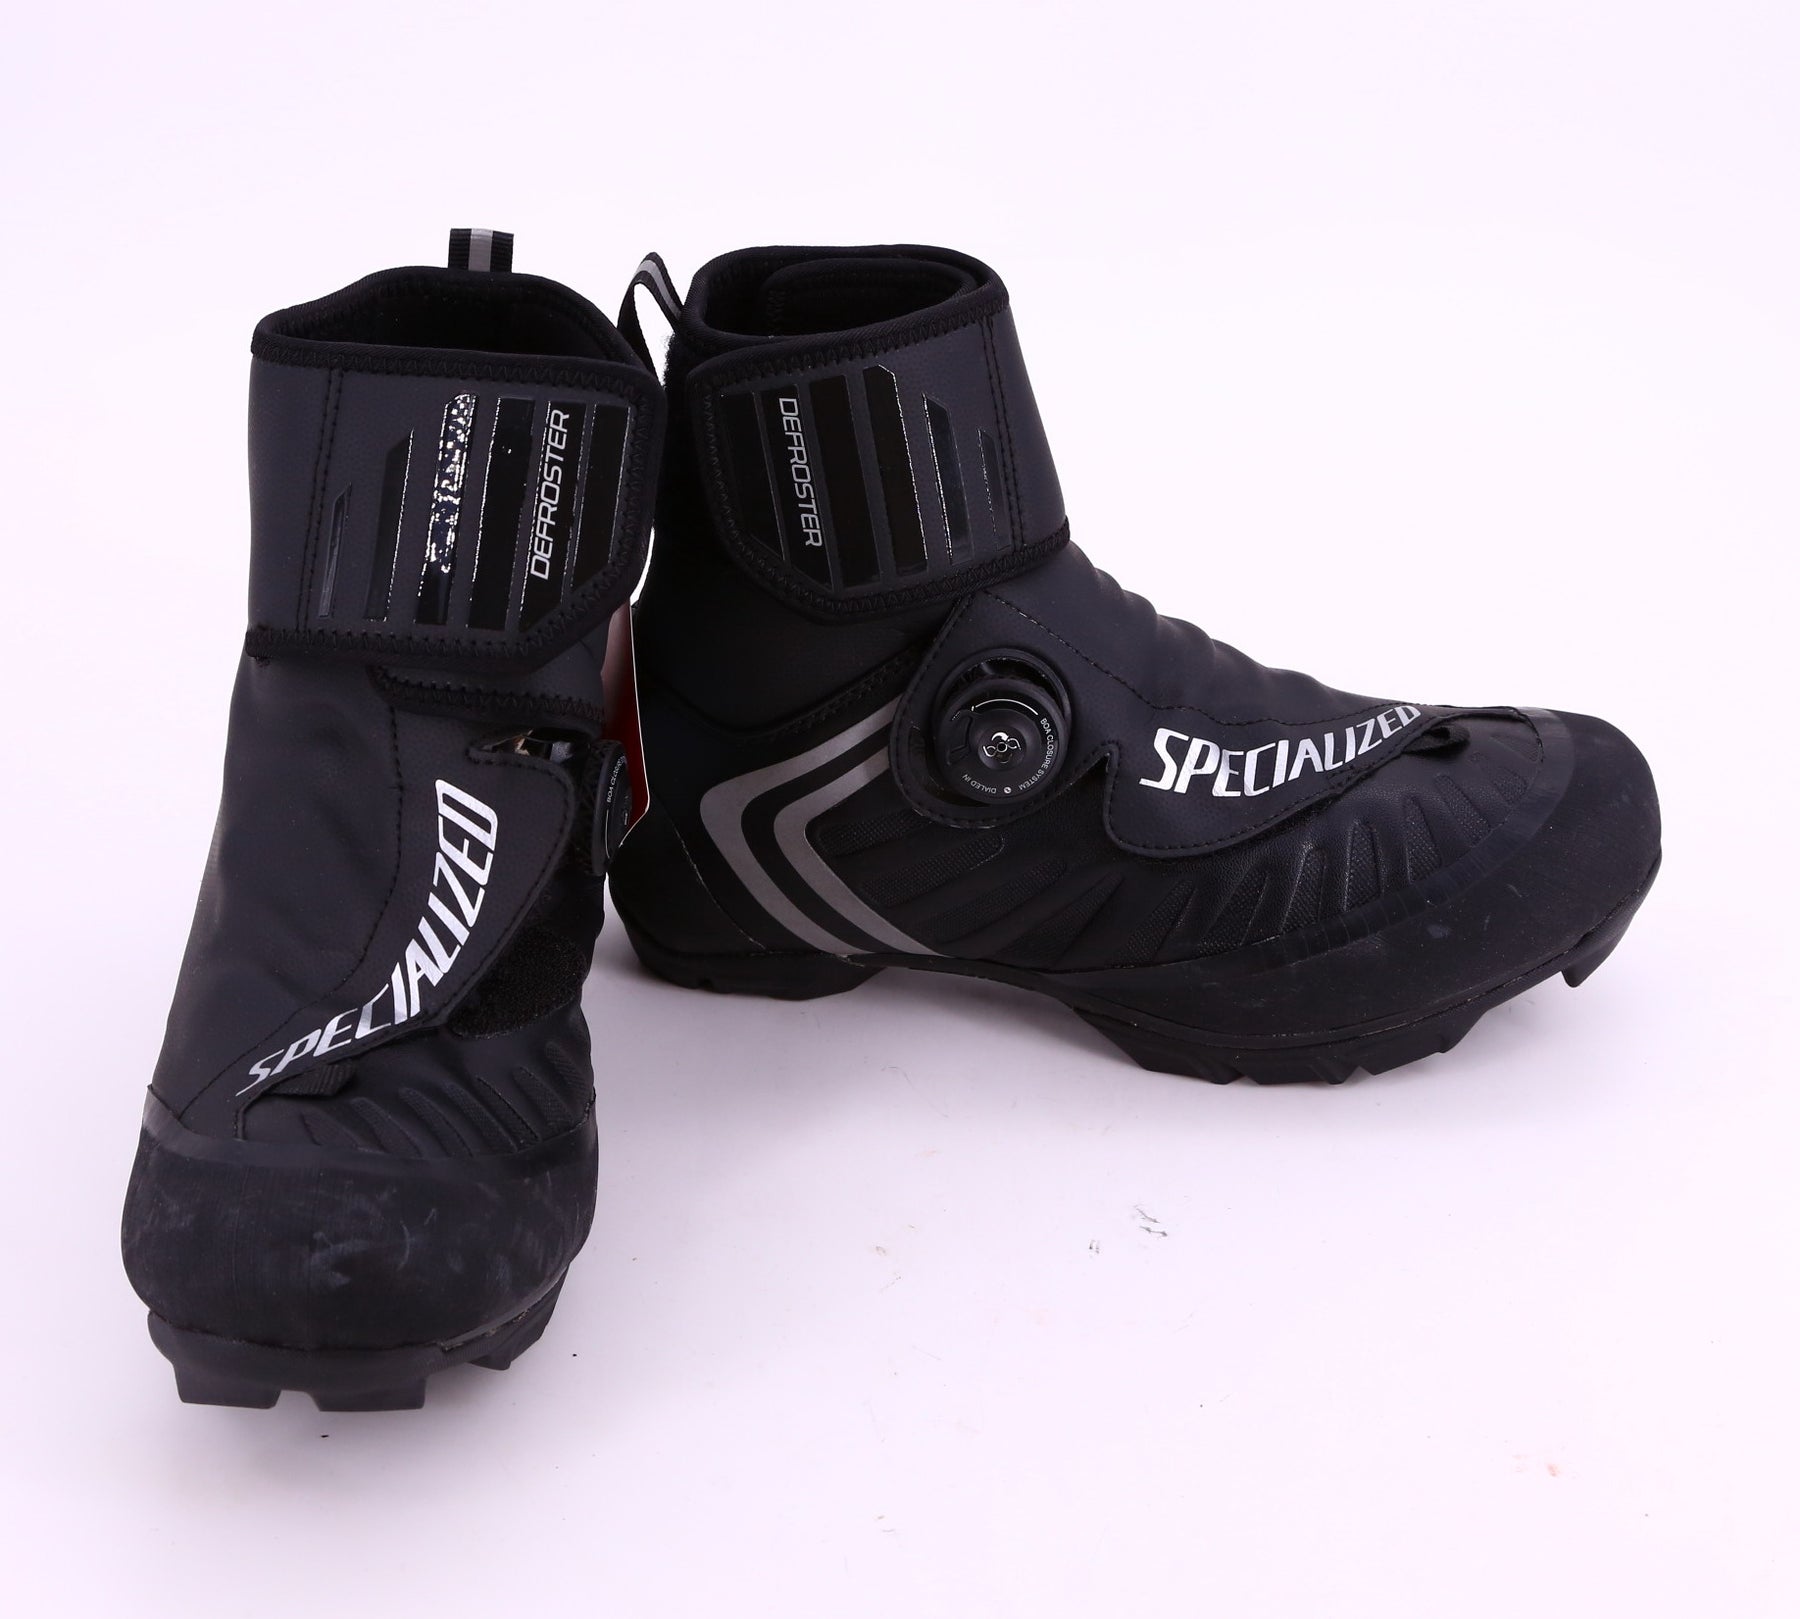 defroster trail mountain bike shoes